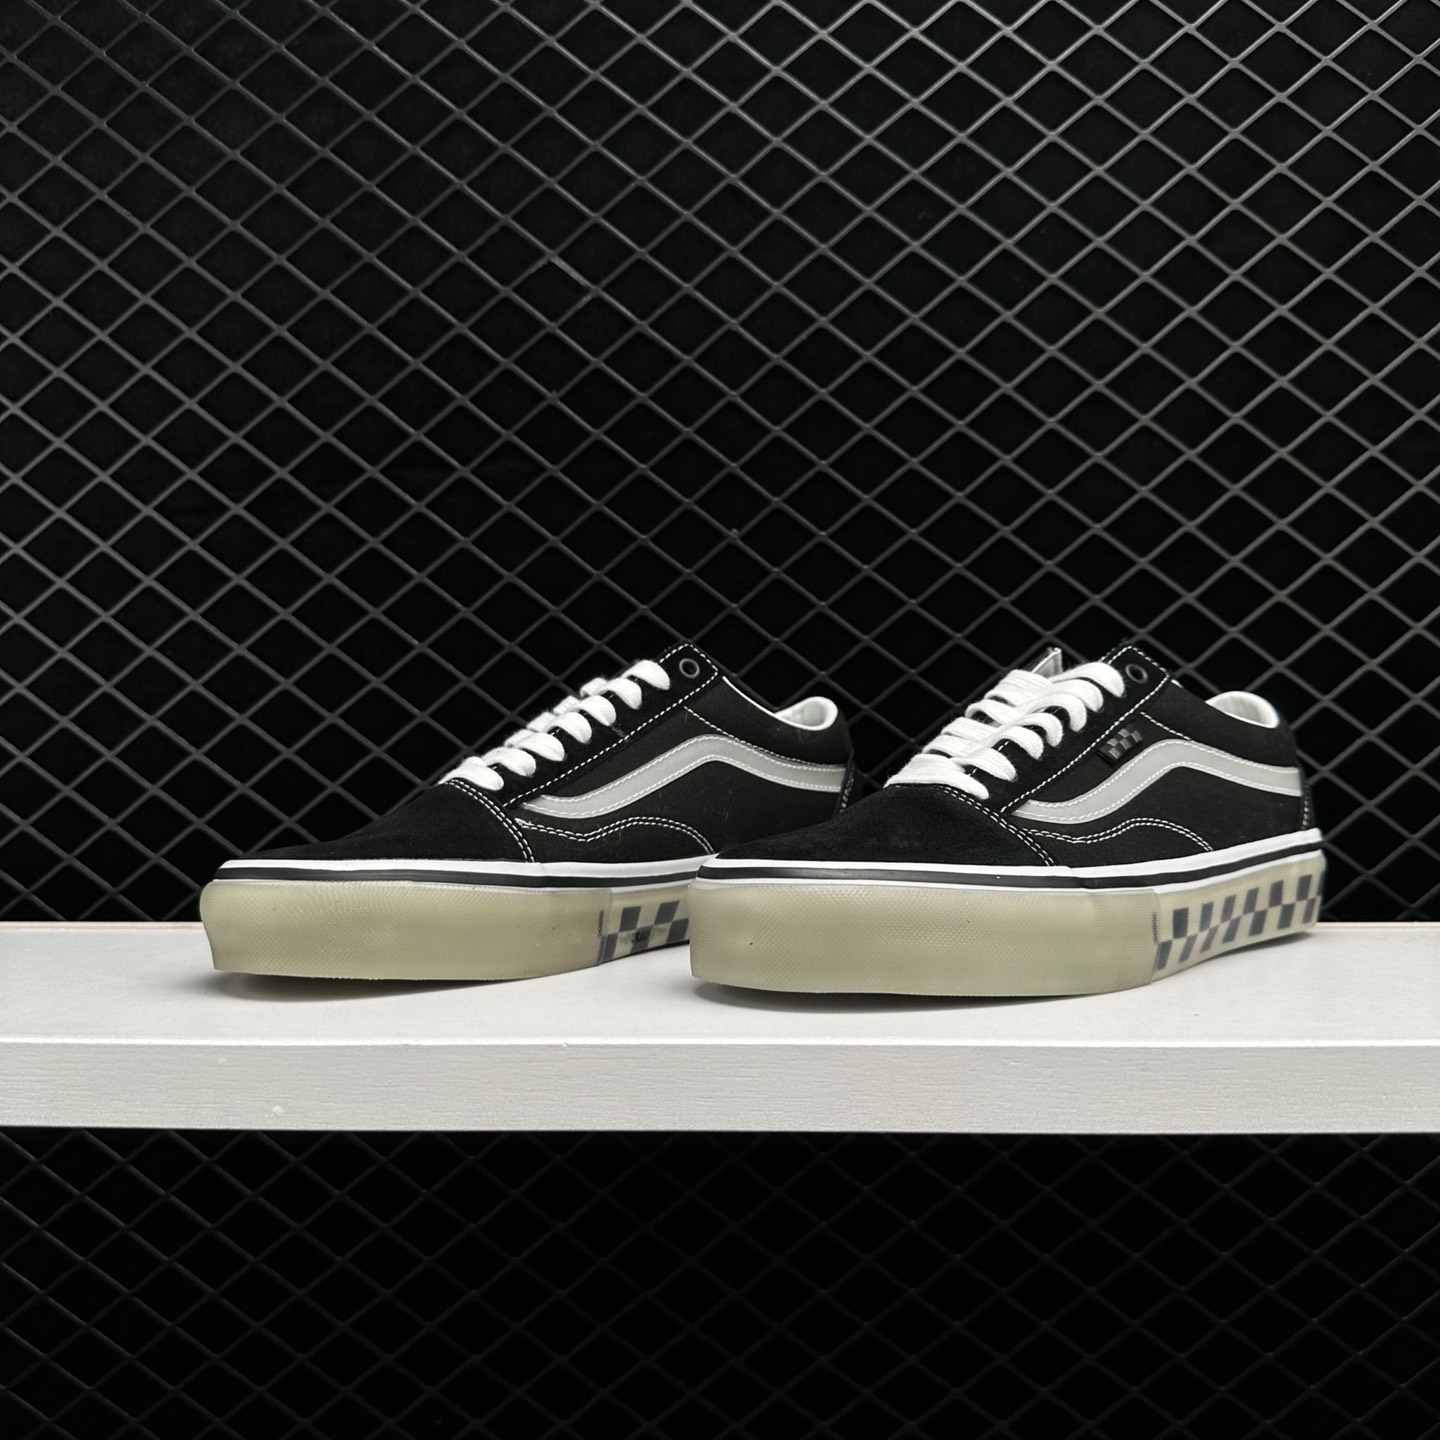 Vans Skate Old Skool 'Translucent Rubber' Black Gray VN0A5FCBBCQ - Stylish and Durable Skate Shoes